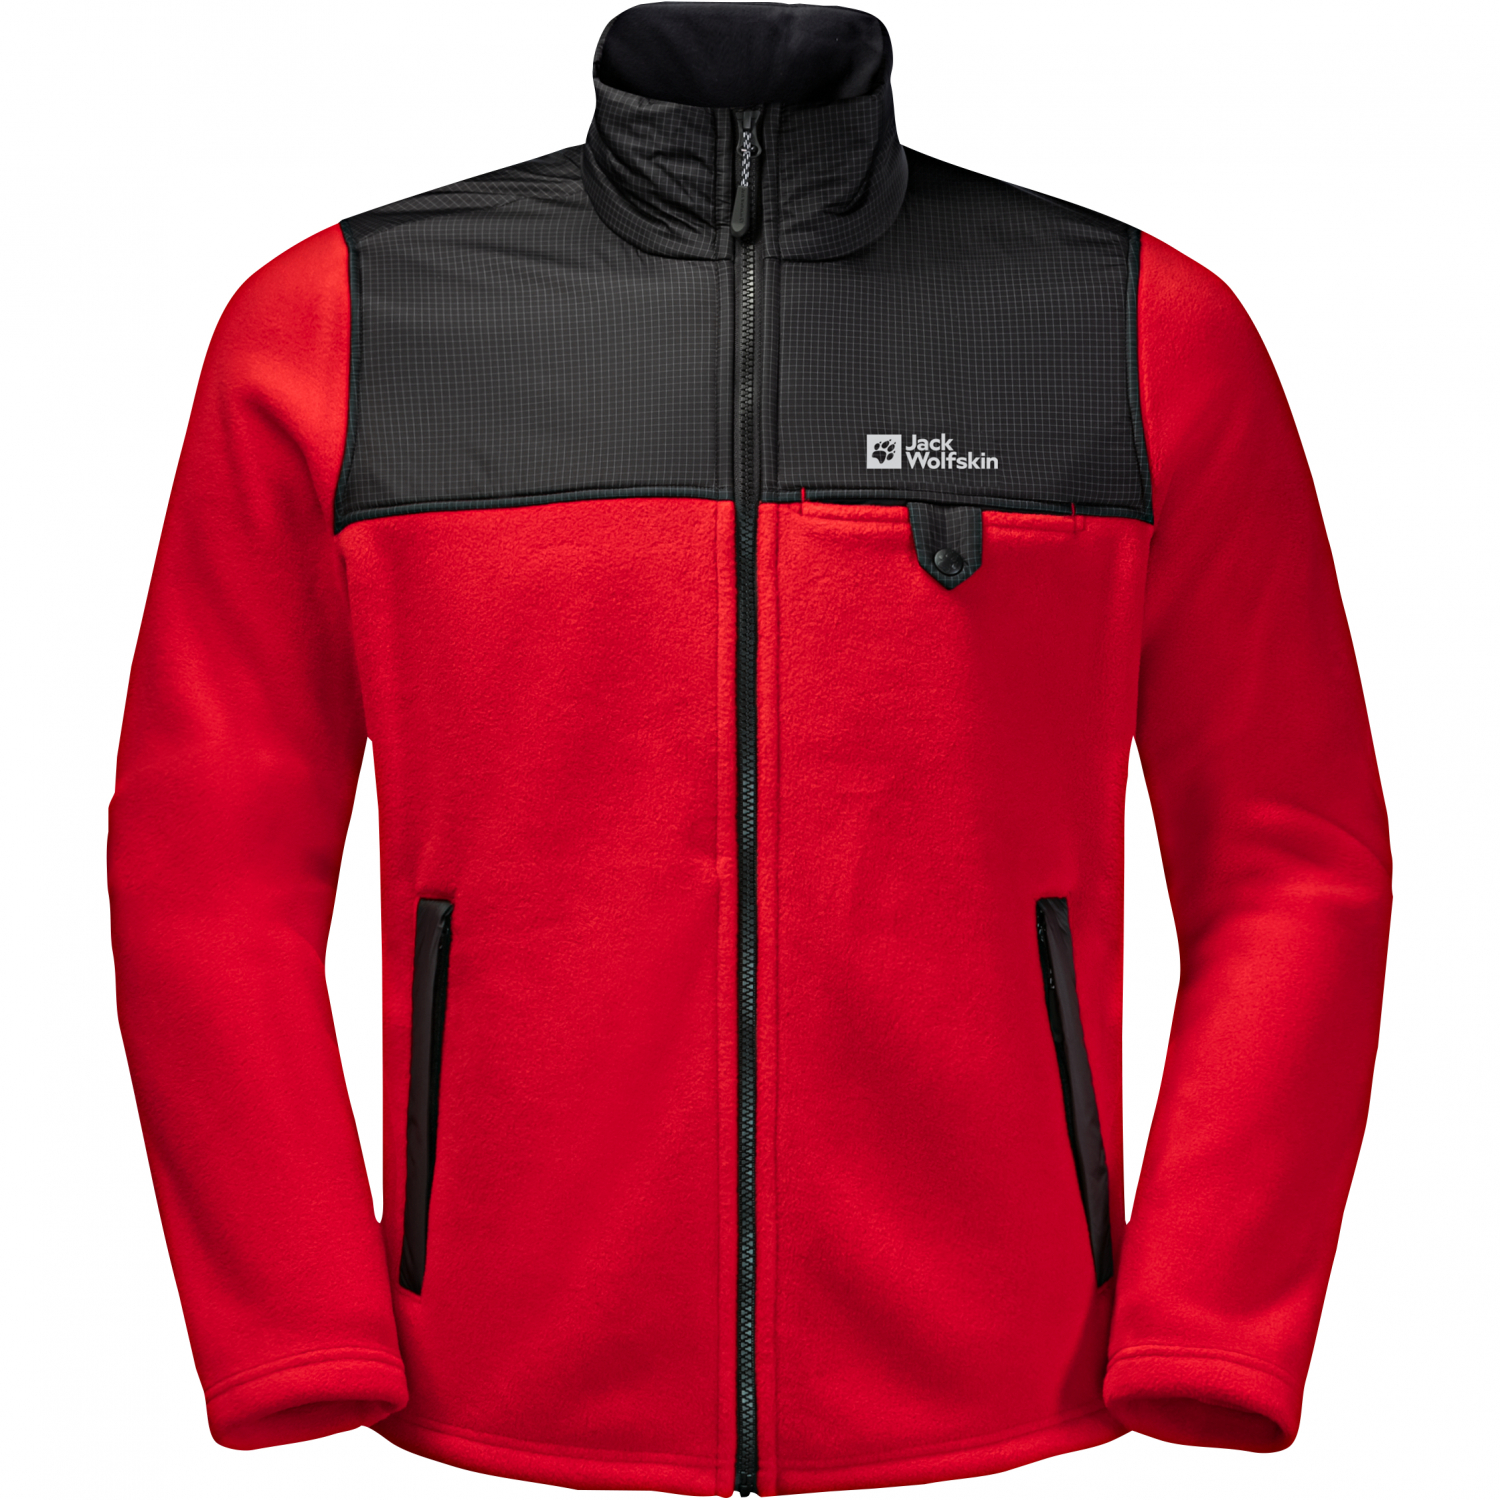 DNA Jack fleece (red/black) | Wolfskin Shop Grizzly Askari at prices low Fishing jacket